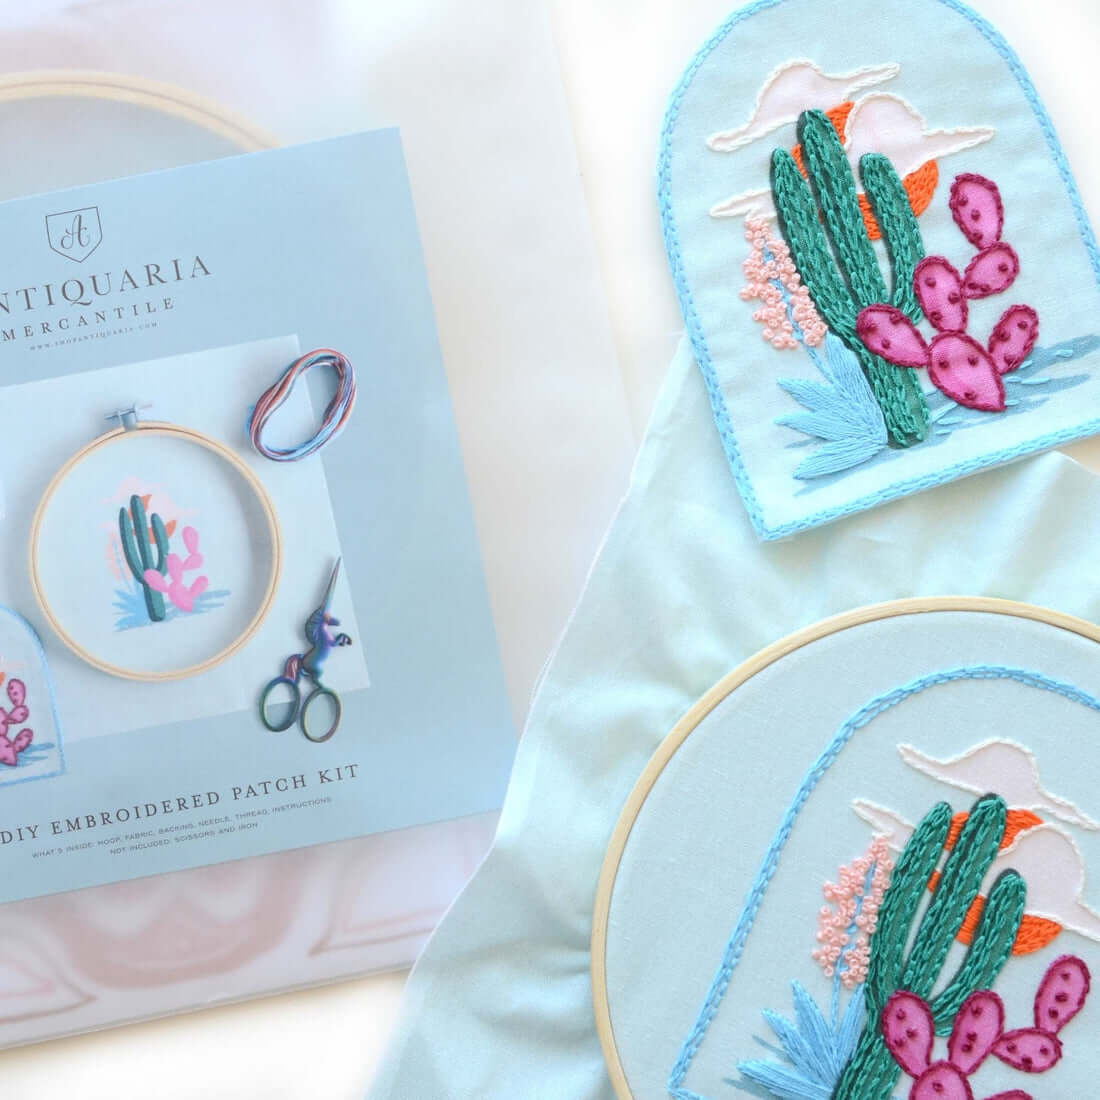 Hand embroider a cactus patch with this DIY kit